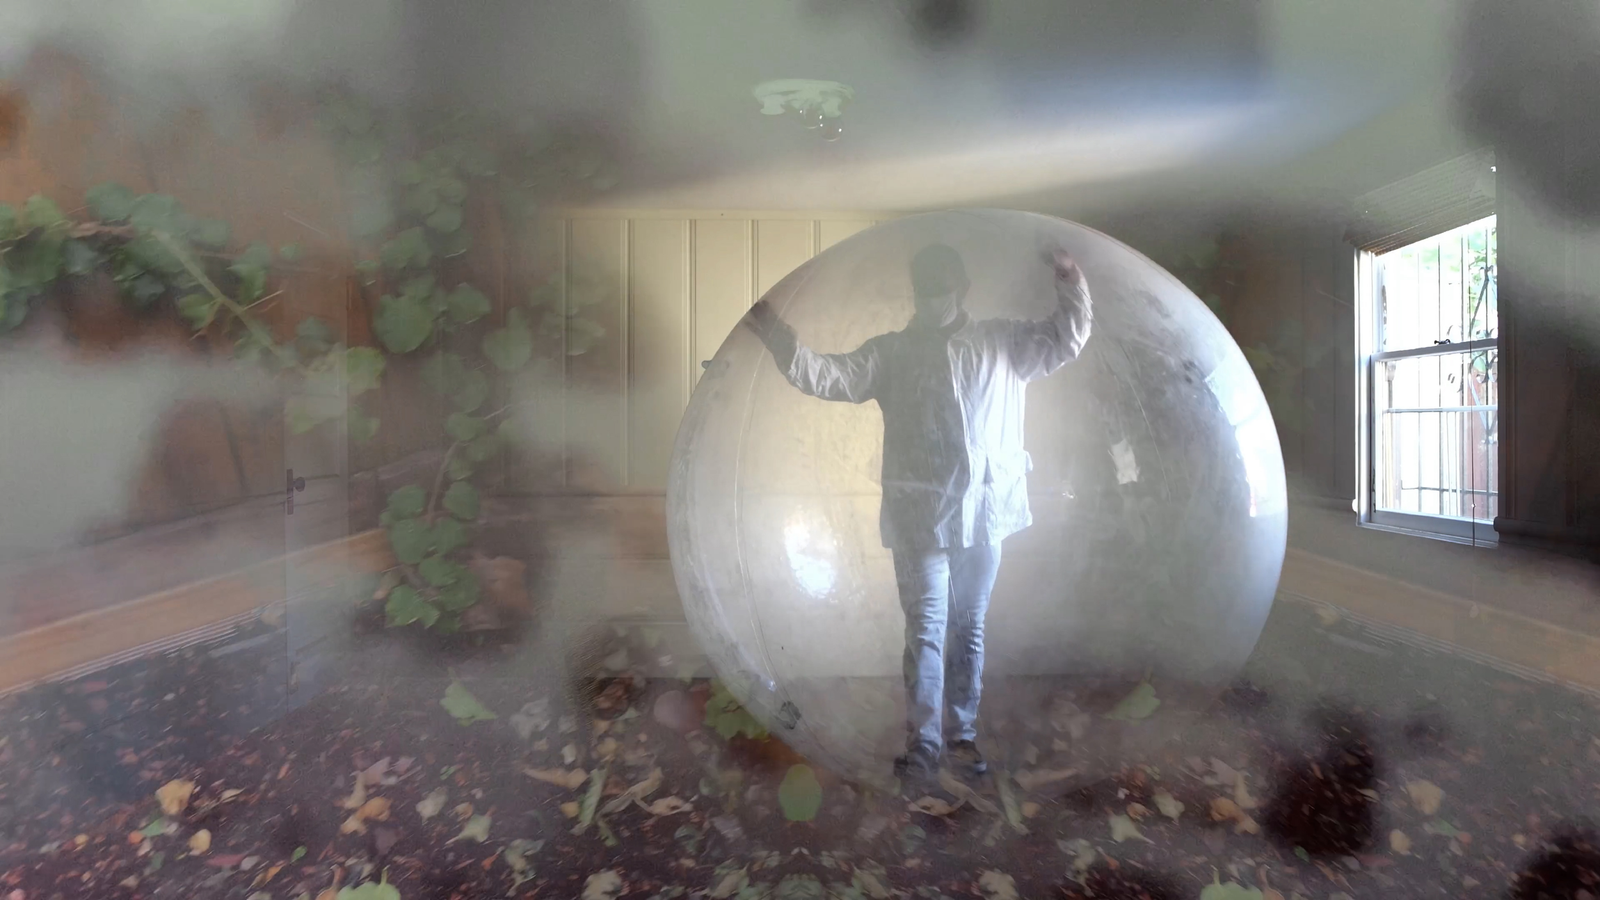 A person standing inside a large transparent ball in a room full of leaves.